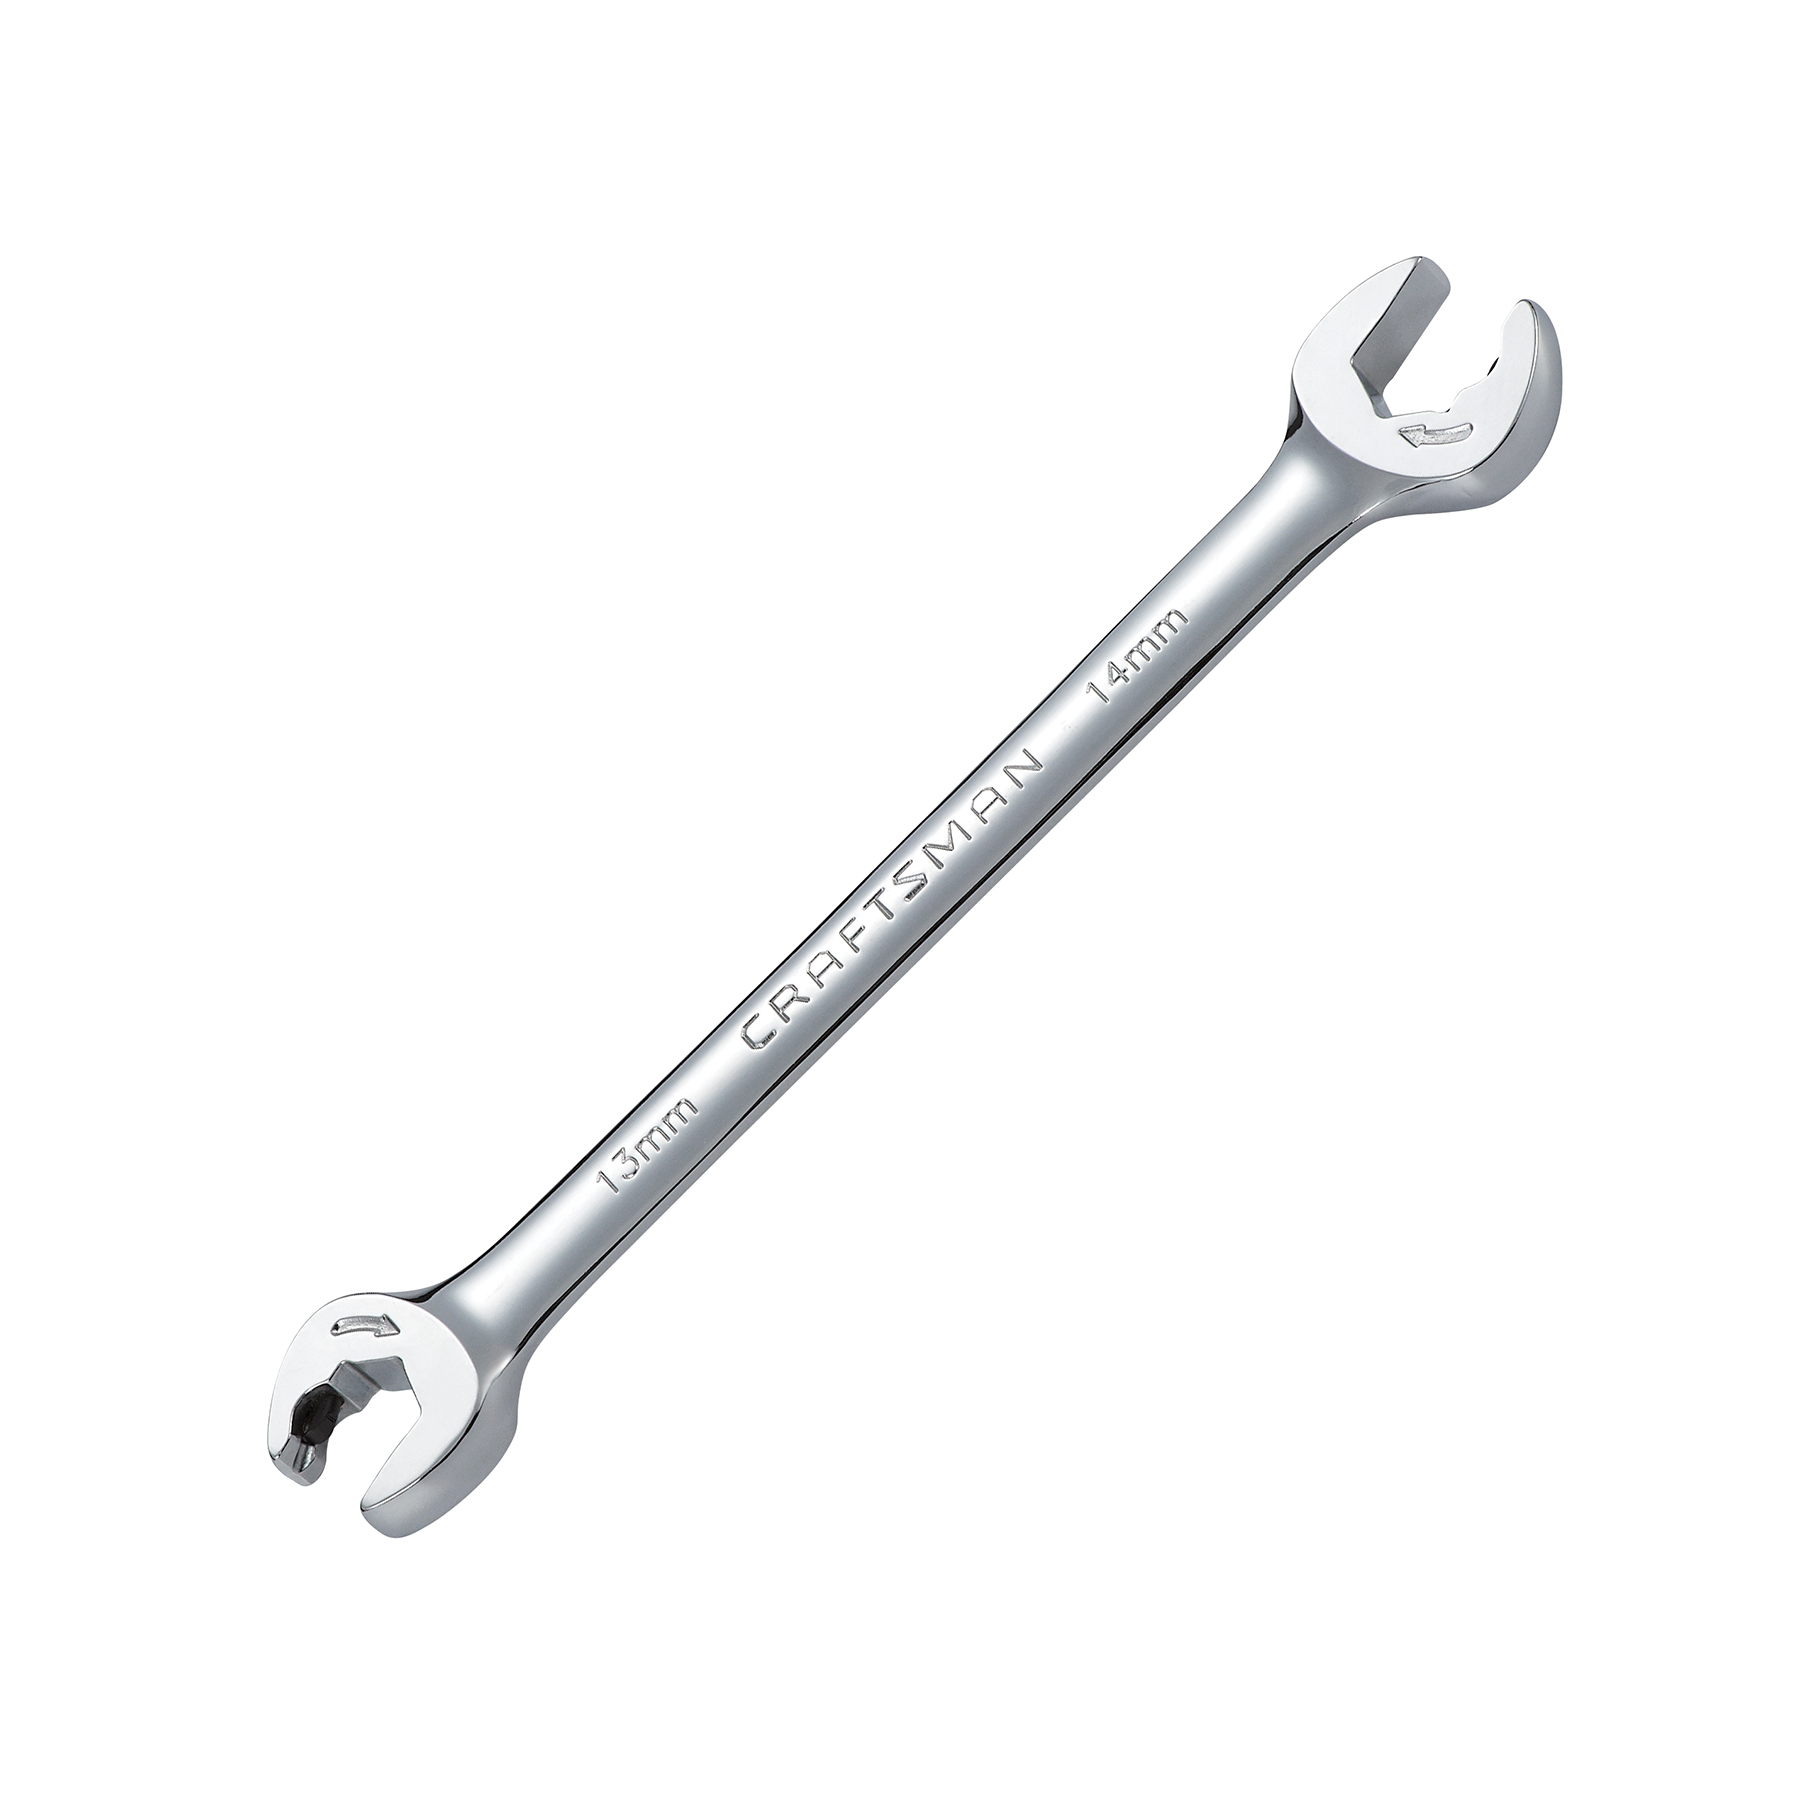 Craftsman 13 x 14 mm Open End Ratcheting Wrench